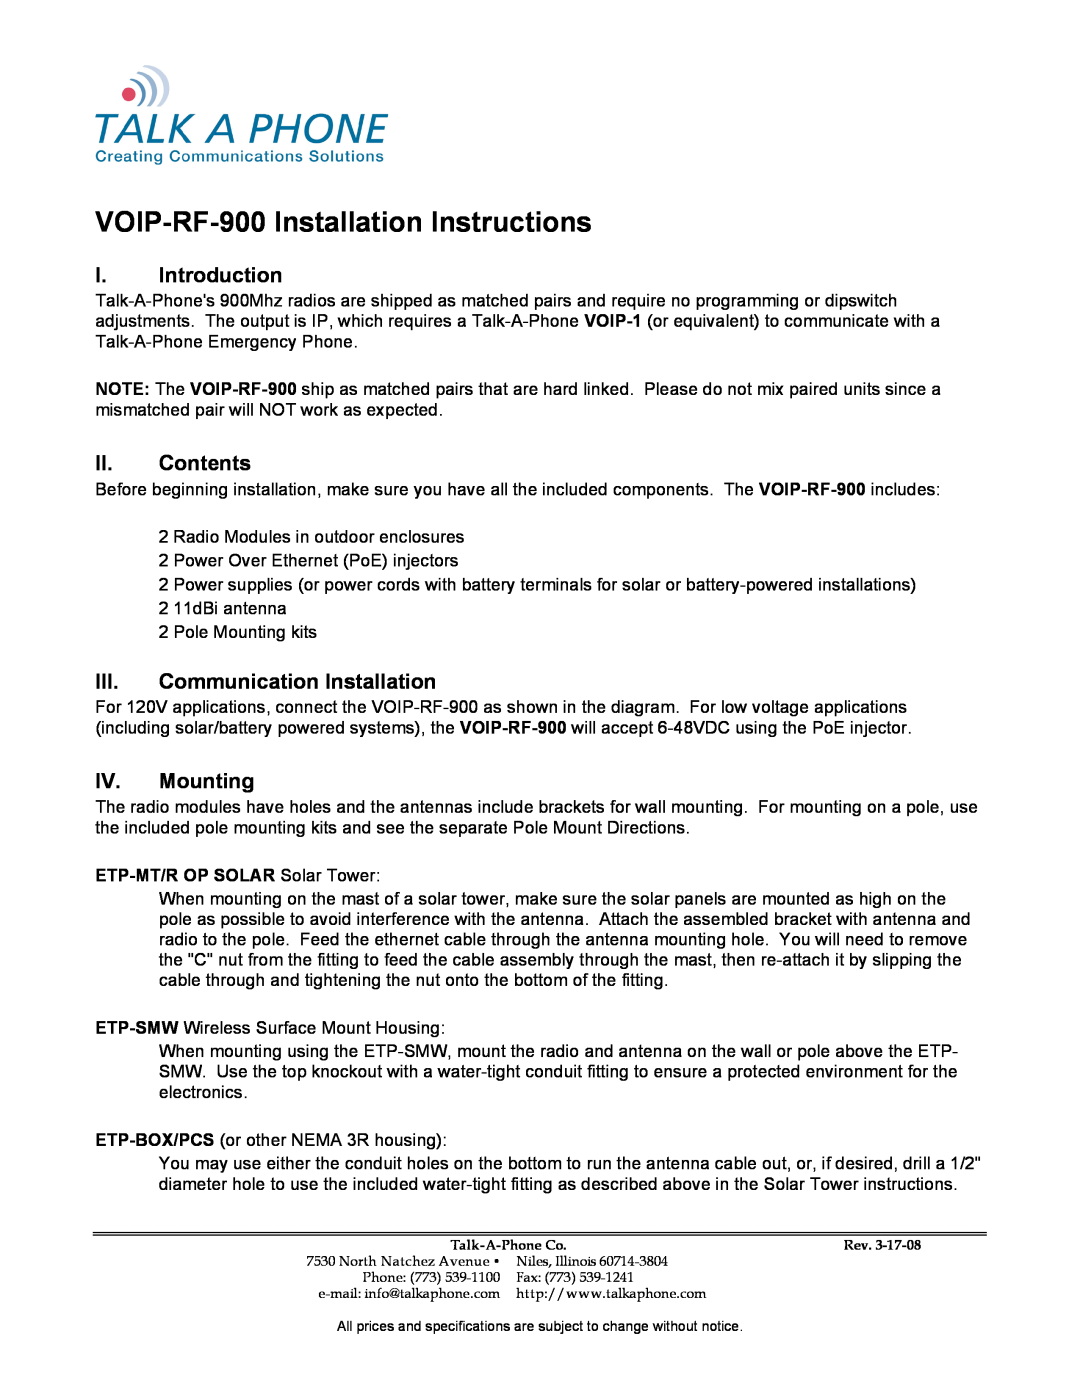 Talk electronic installation instructions VOIP-RF-900Installation Instructions, I.Introduction, II.Contents 